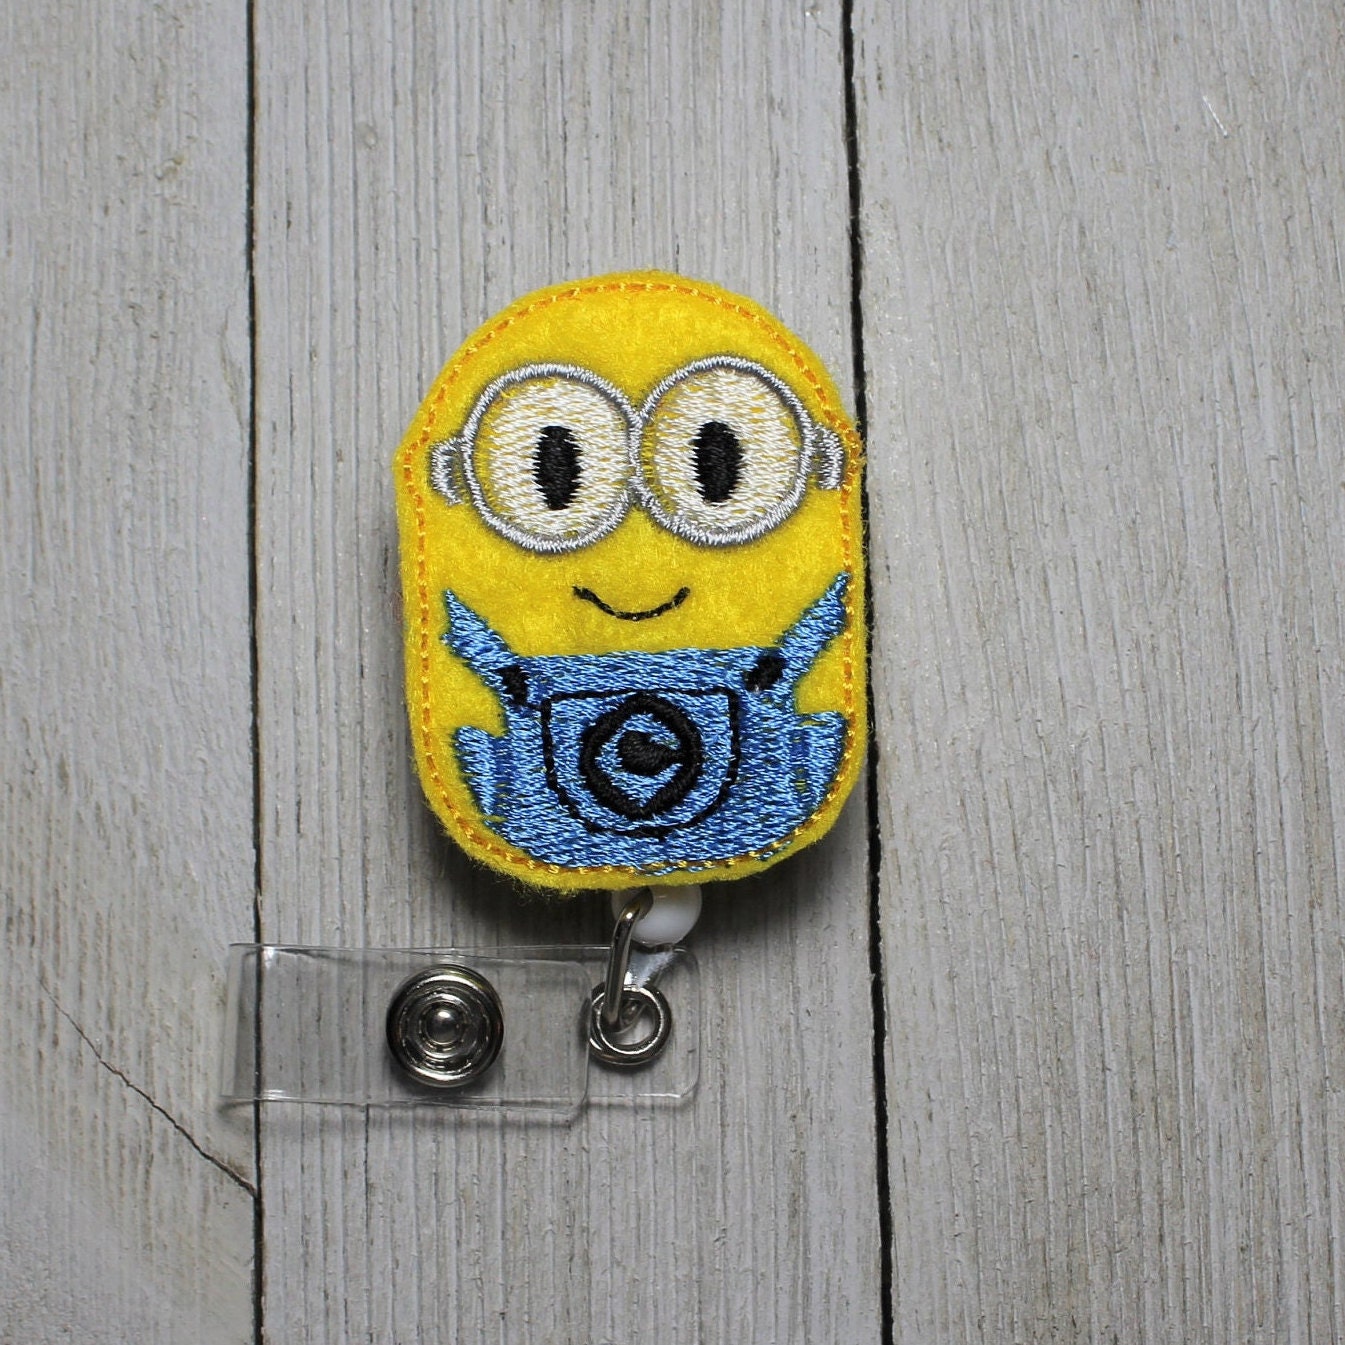 NEW Minion Card Holder Retractable, Despicable Me, Work School ID Badge, USA